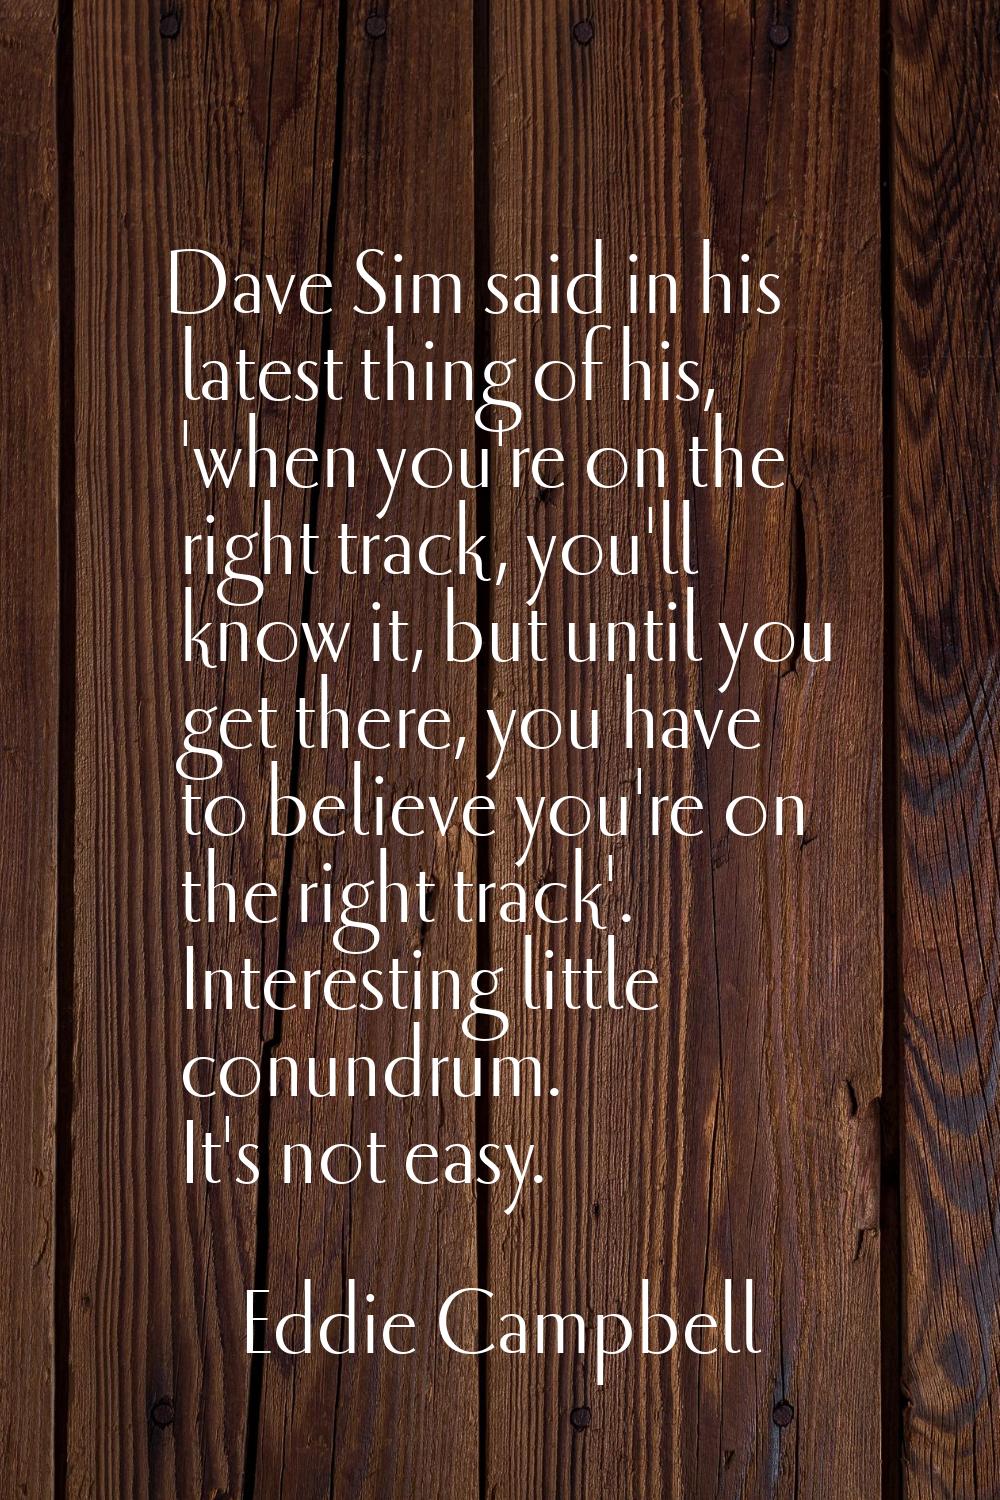 Dave Sim said in his latest thing of his, 'when you're on the right track, you'll know it, but unti